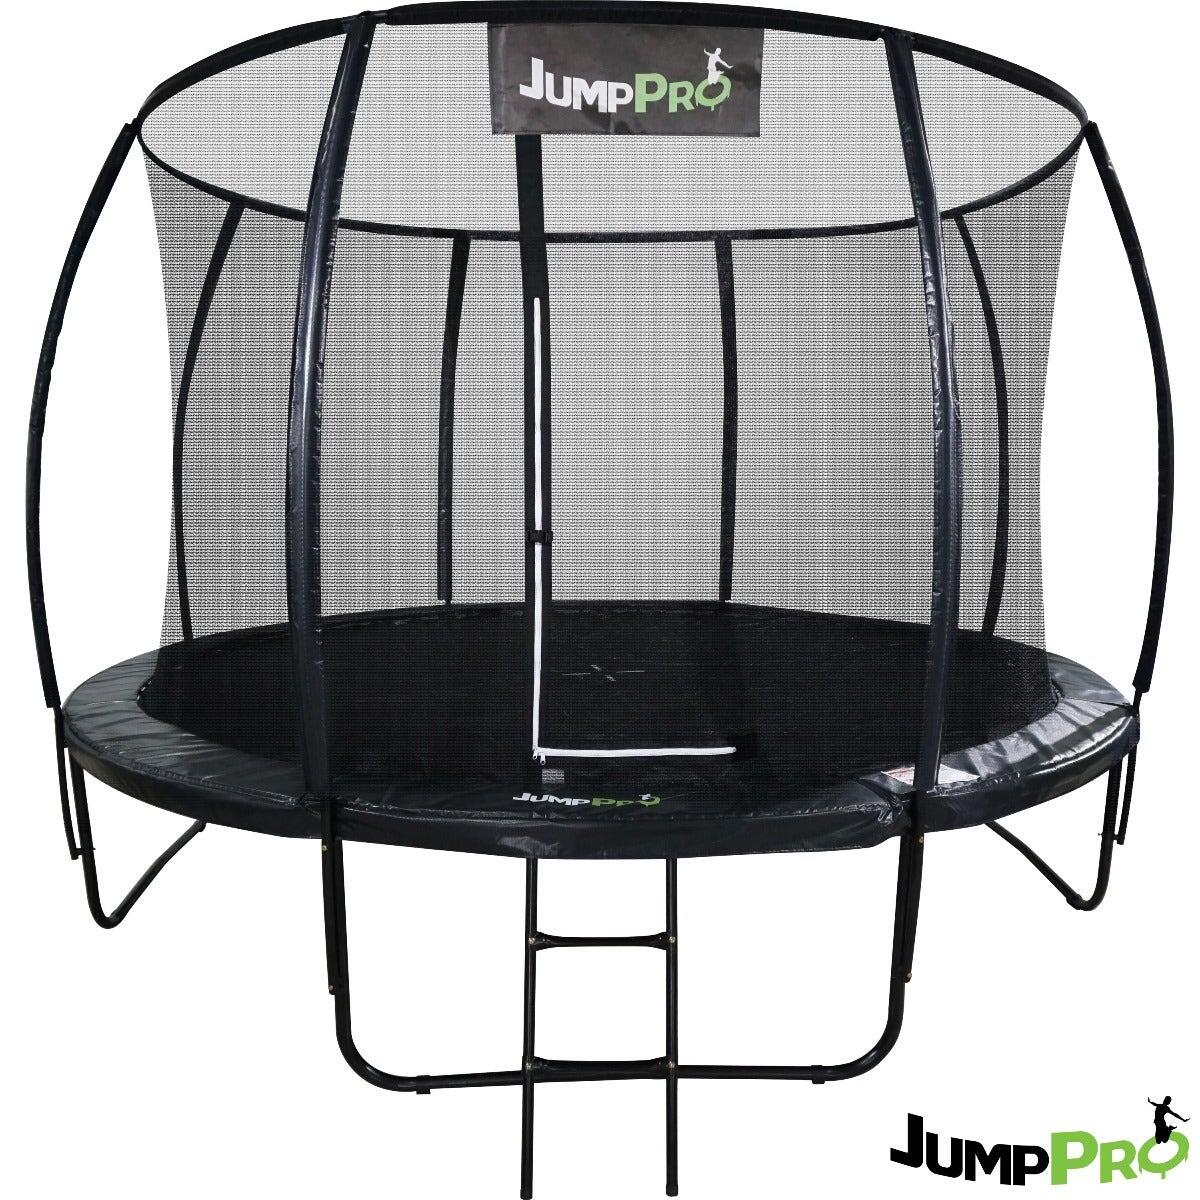 JUMPPRO 8ft JumpPRO™ Xcel Black Round Trampoline with Enclosure